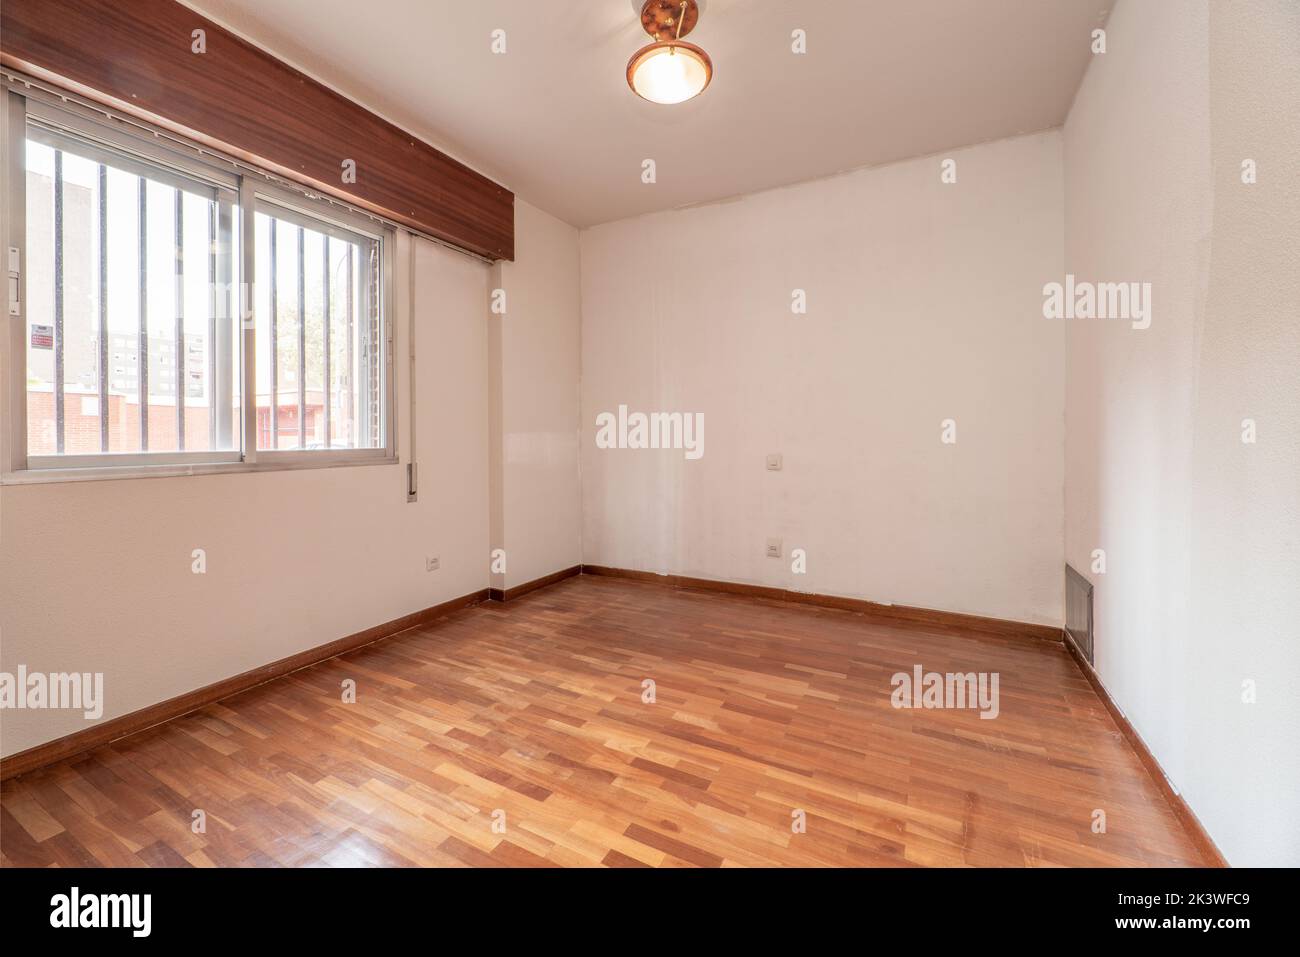 Empty room with reddish parquet flooring, plain white painted walls and aluminum window with bars Stock Photo